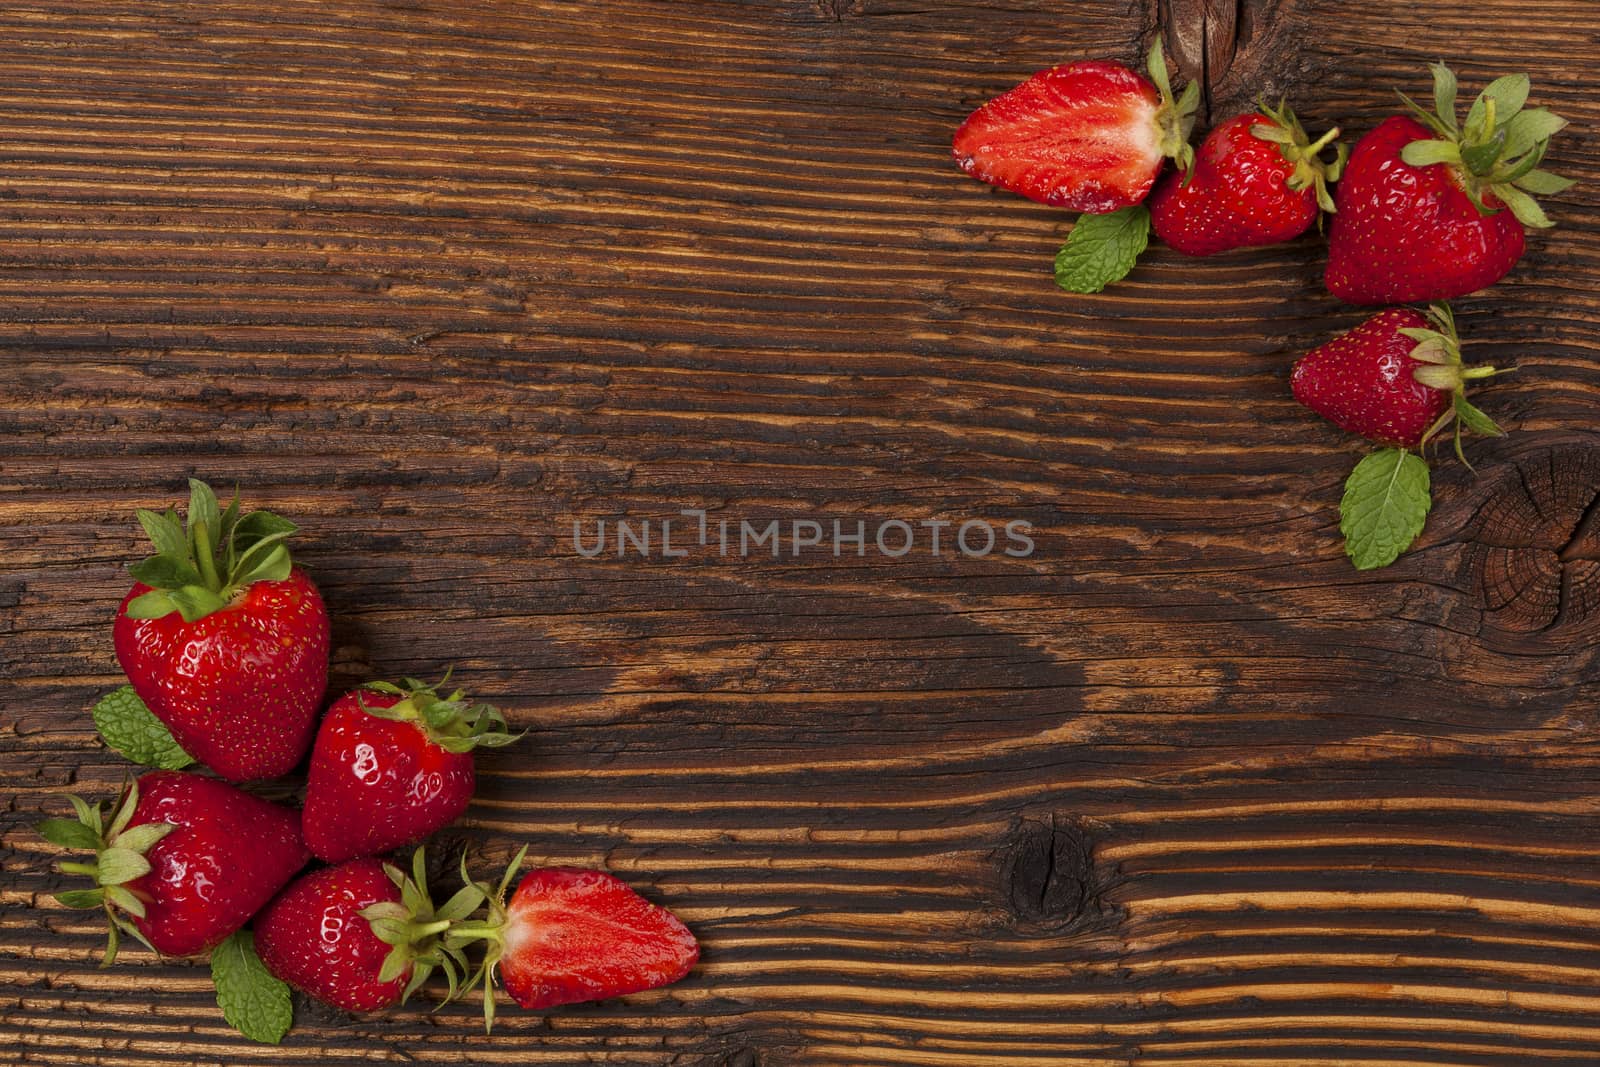 Ripe strawberries on rustic wooden brown table, flat lay. Strawberry background with copyspace. Healthy fruit eating.